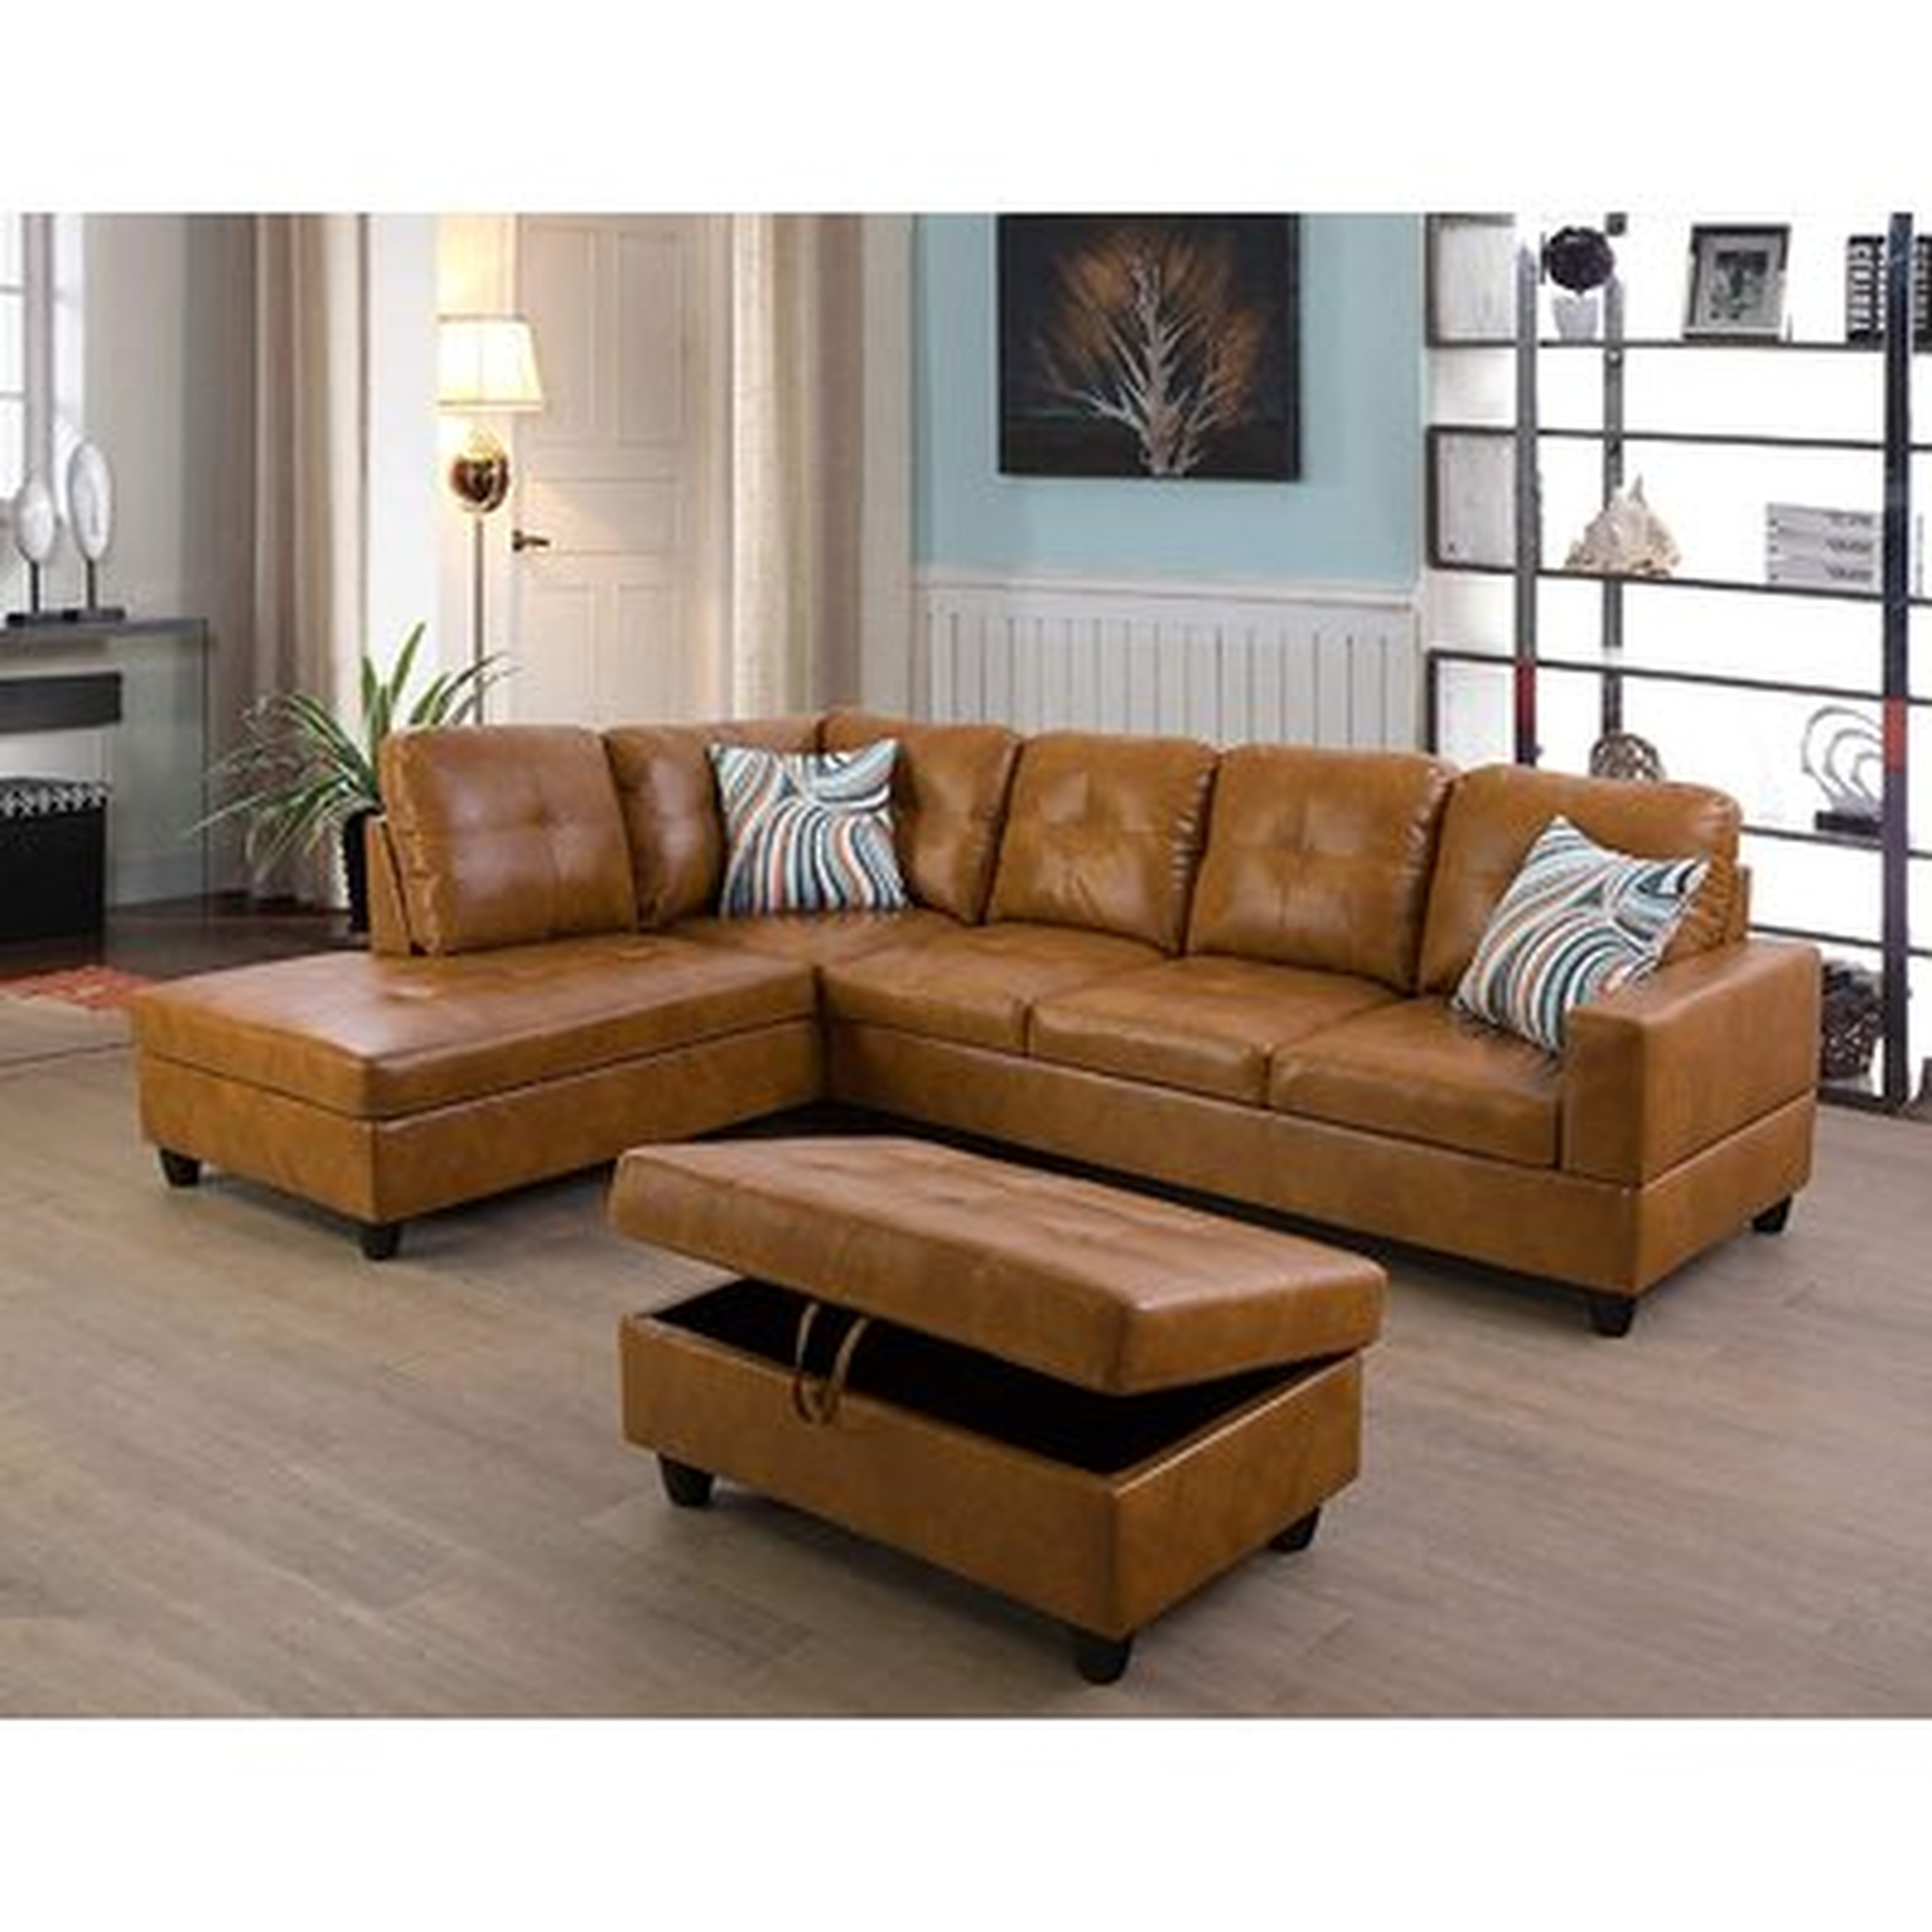 Abhiraam 104" Wide Faux Leather Corner Sectional with Ottoman - Wayfair